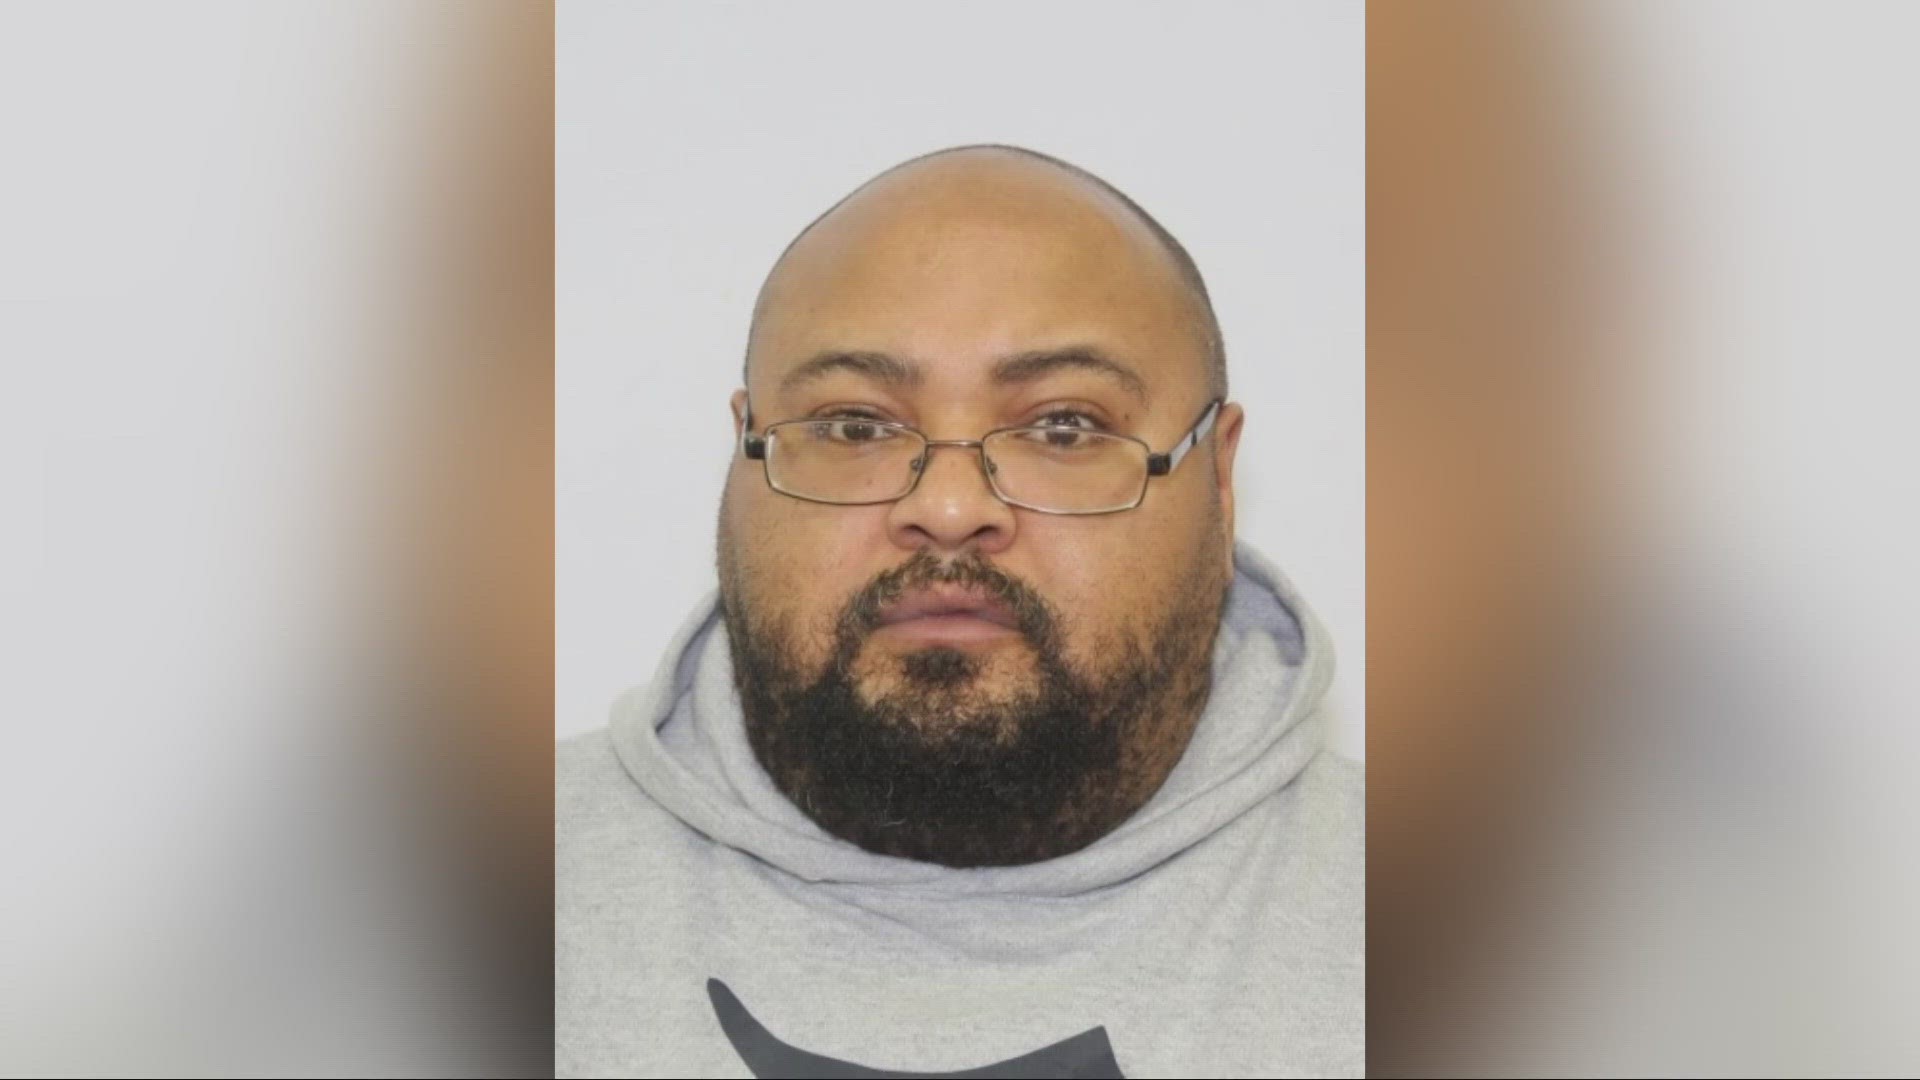 The Orrville Police Department reports that officers have captured 42-year-old Shaun Ross, wanted in connection with the death of 39-year-old Jessica Duprey.